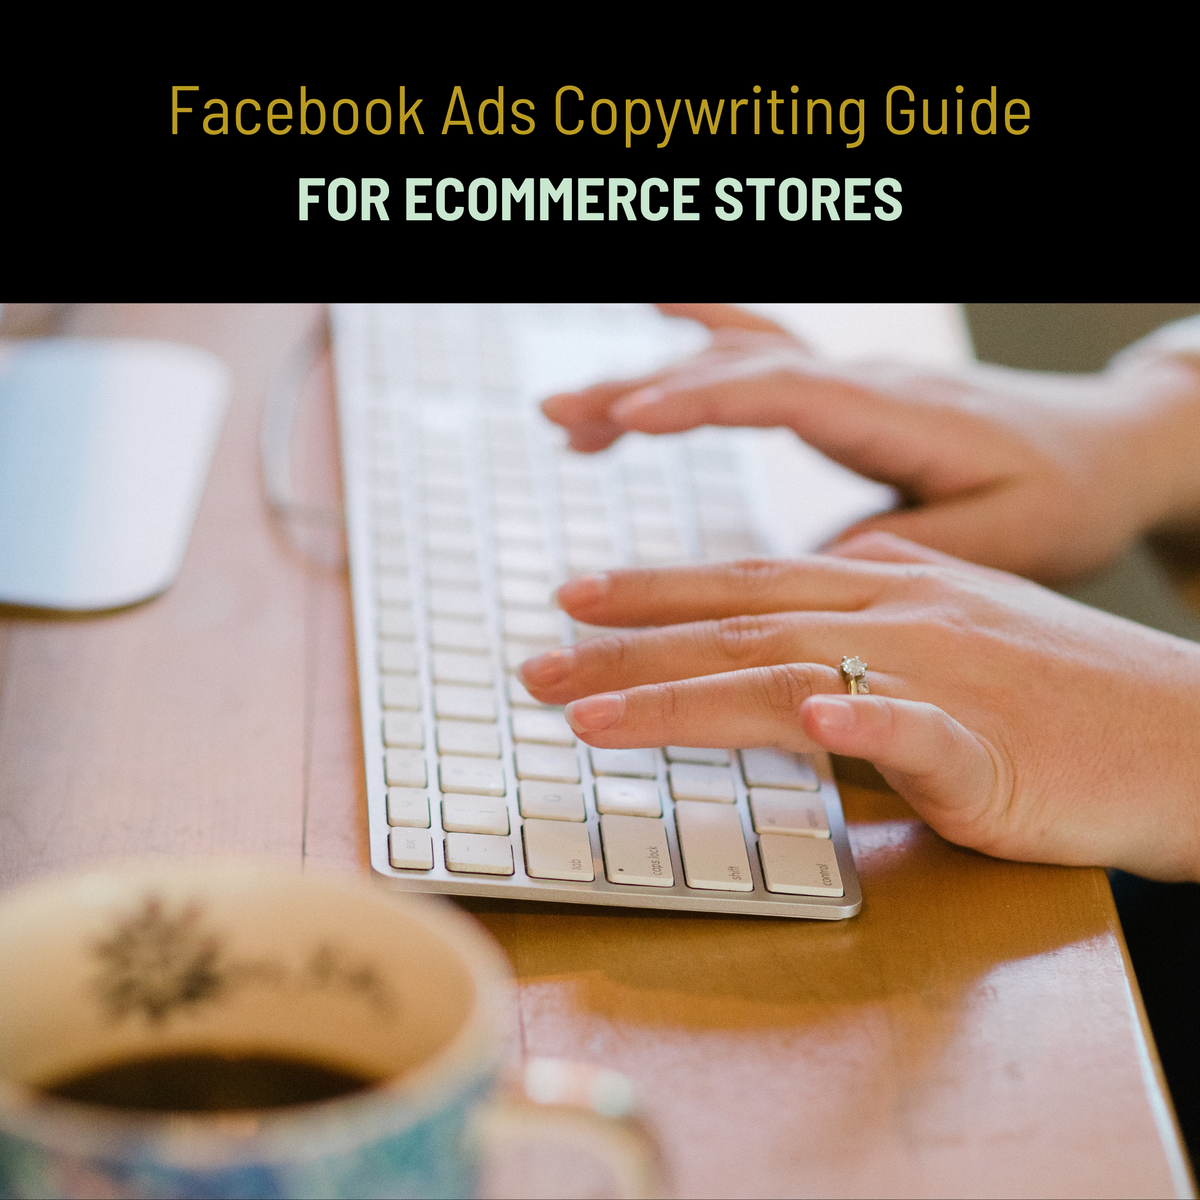 Copywriting Guide For Ecommerce Facebook Ads